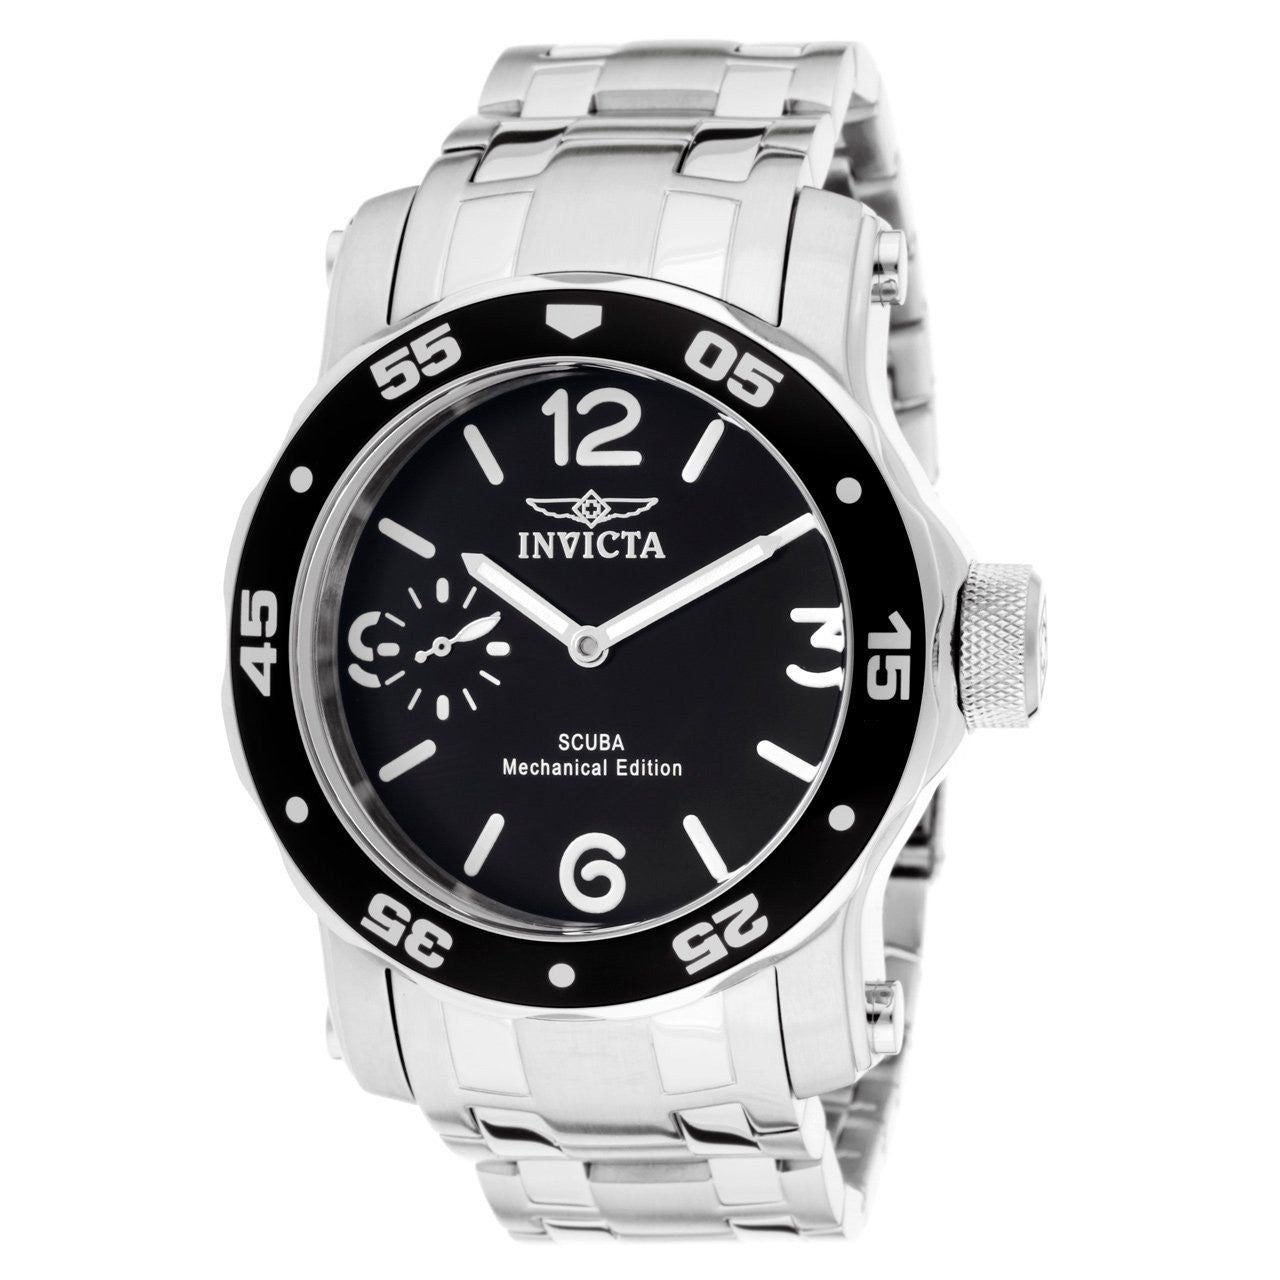 Invicta Men's 10366 Pro Diver Scuba Mechanical Black Dial Stainless Steel Watch